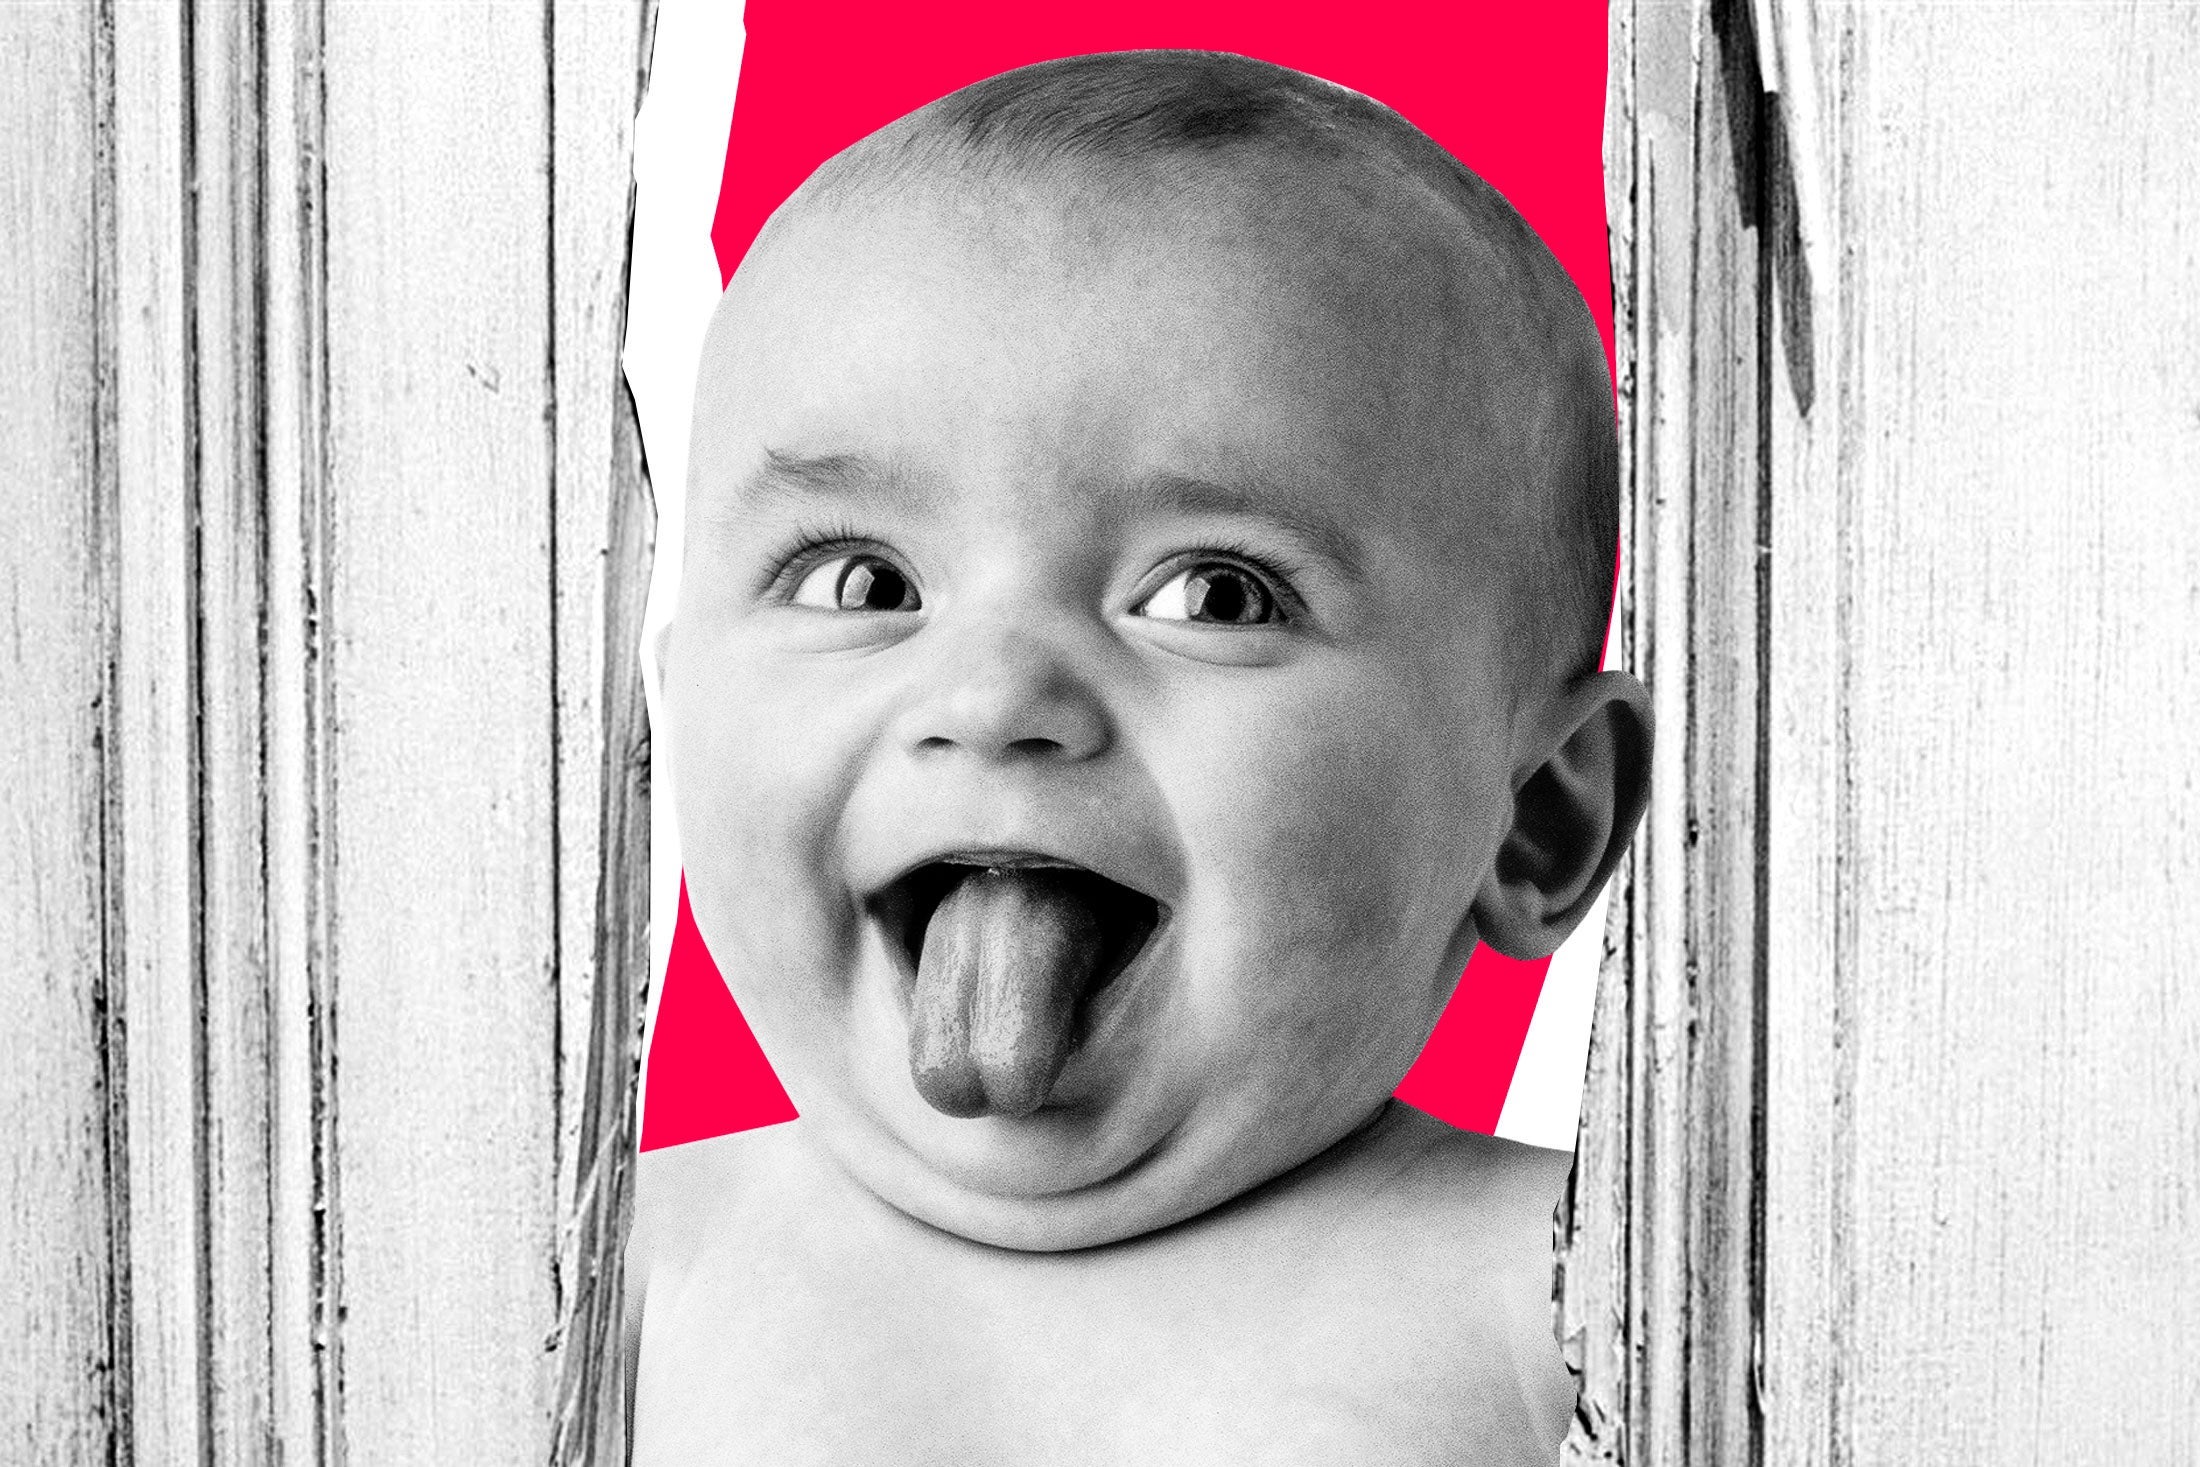 Baby busting its head through a door split open with an axe a la 'The Shining'.